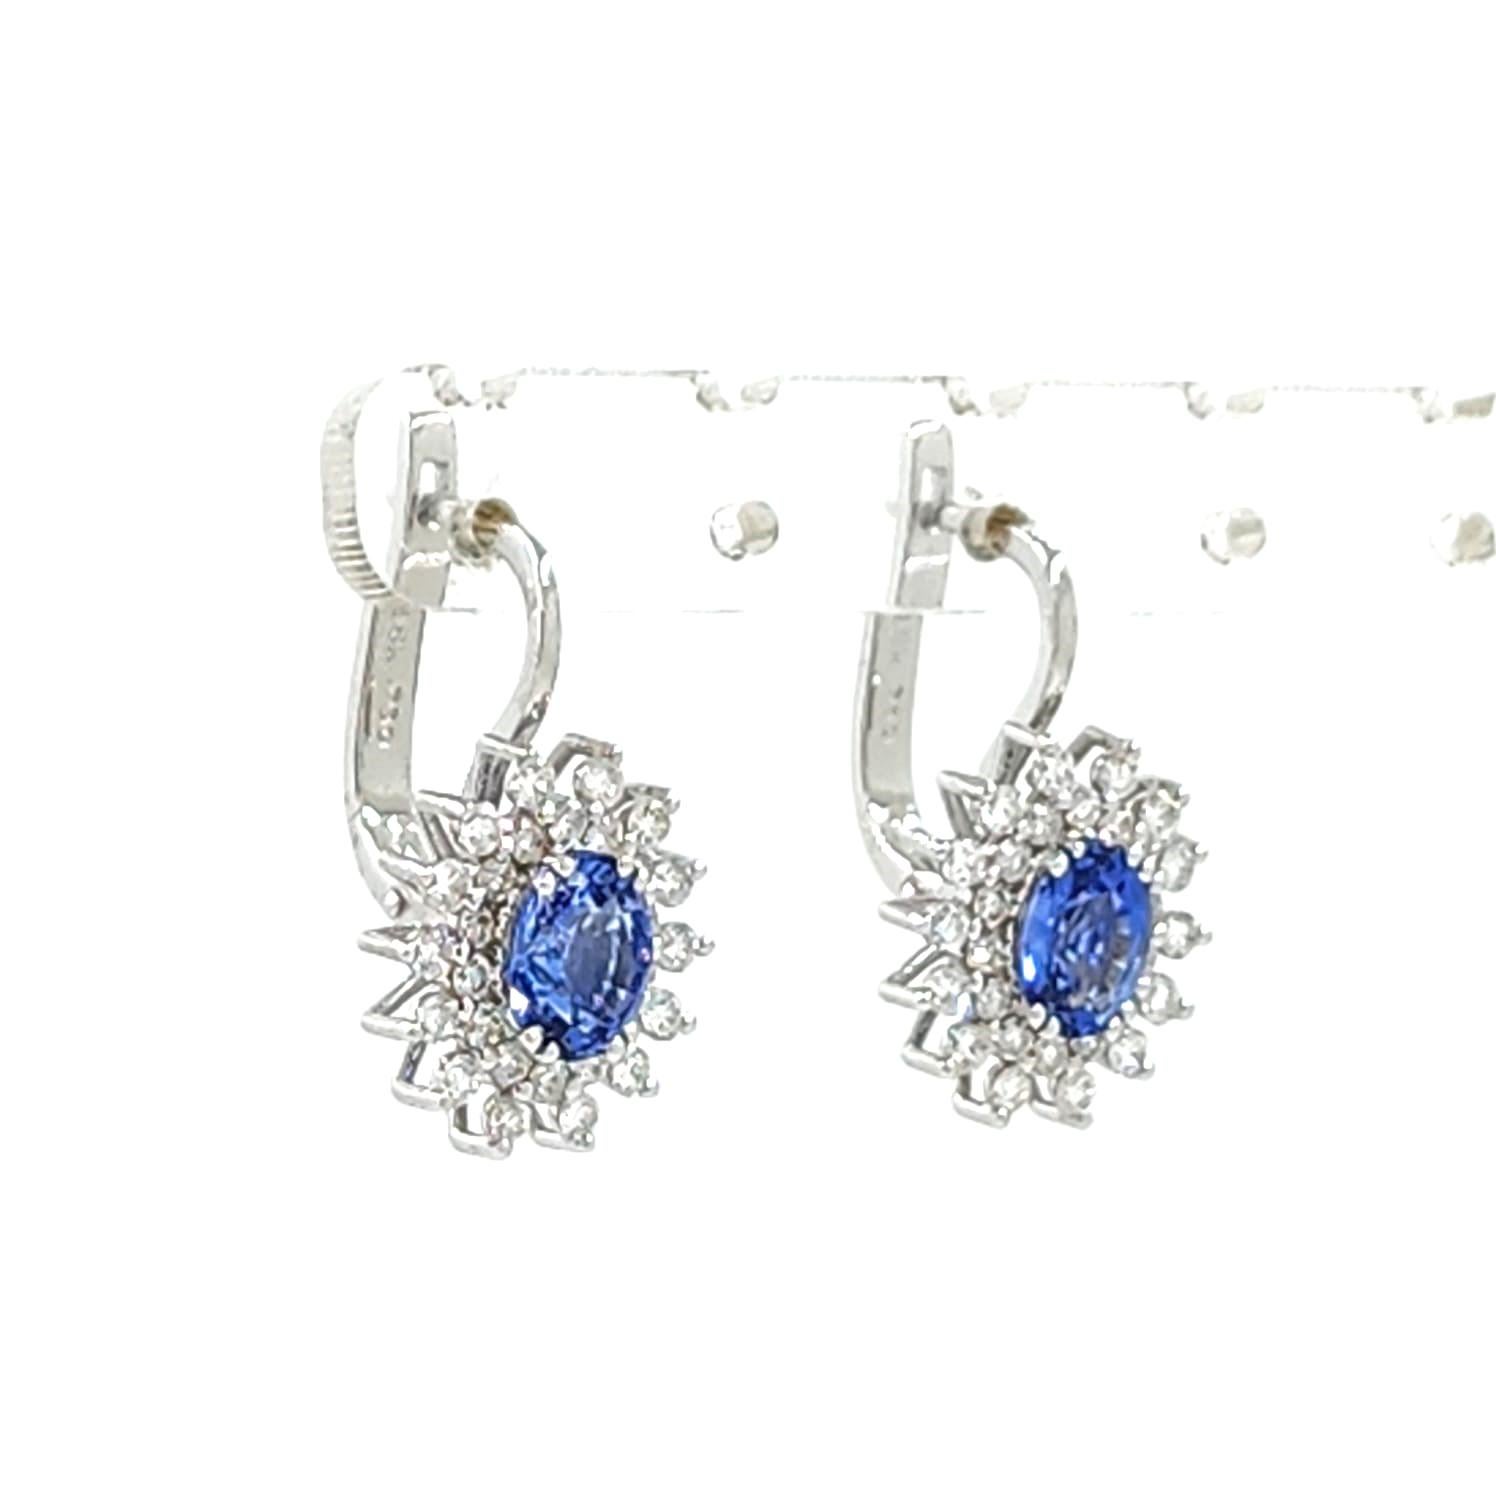 3.04Ct Blue Sapphire Earrings in 18 Karat White Gold In New Condition For Sale In Hong Kong, HK